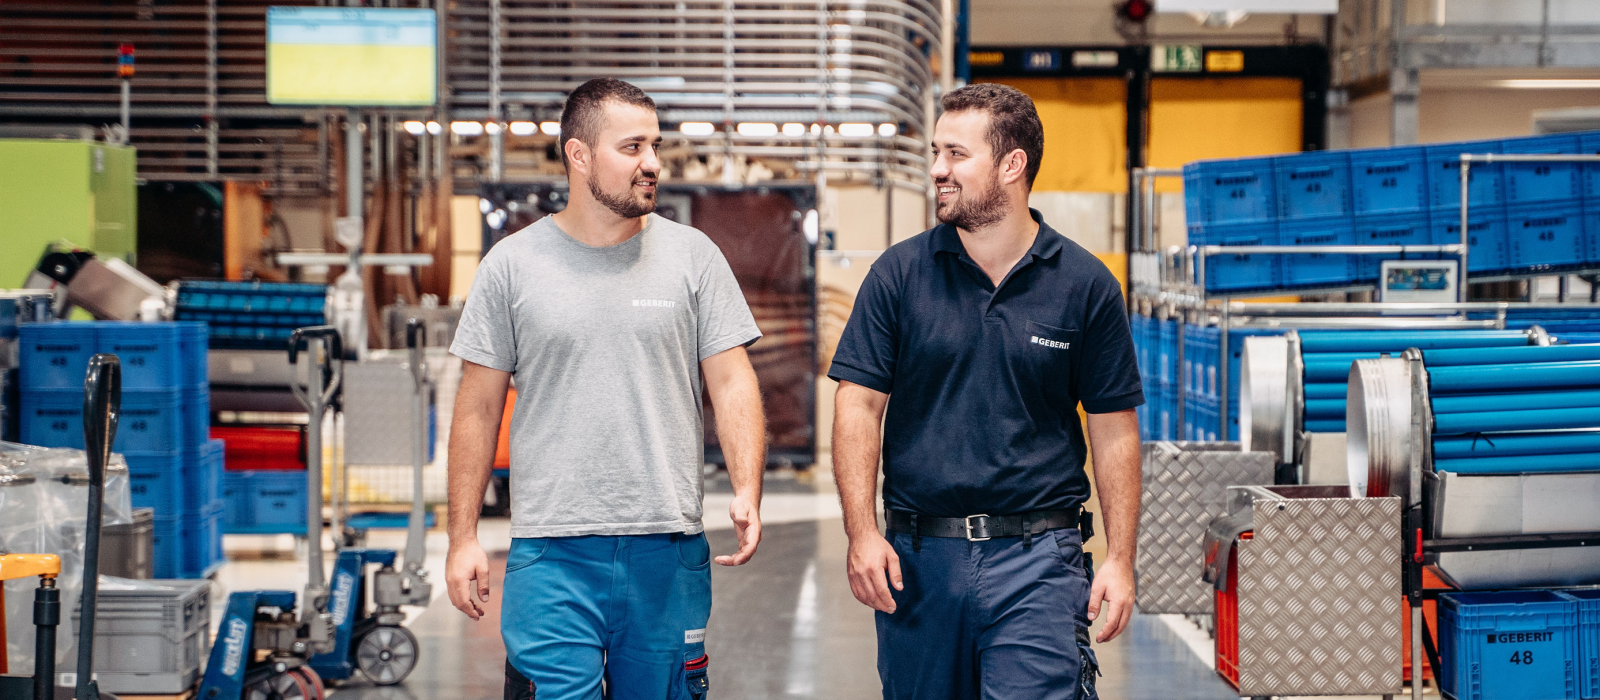 Paul and Peter Harm are twins and managers at the Geberit plant in Pottenbrunn, Austria.